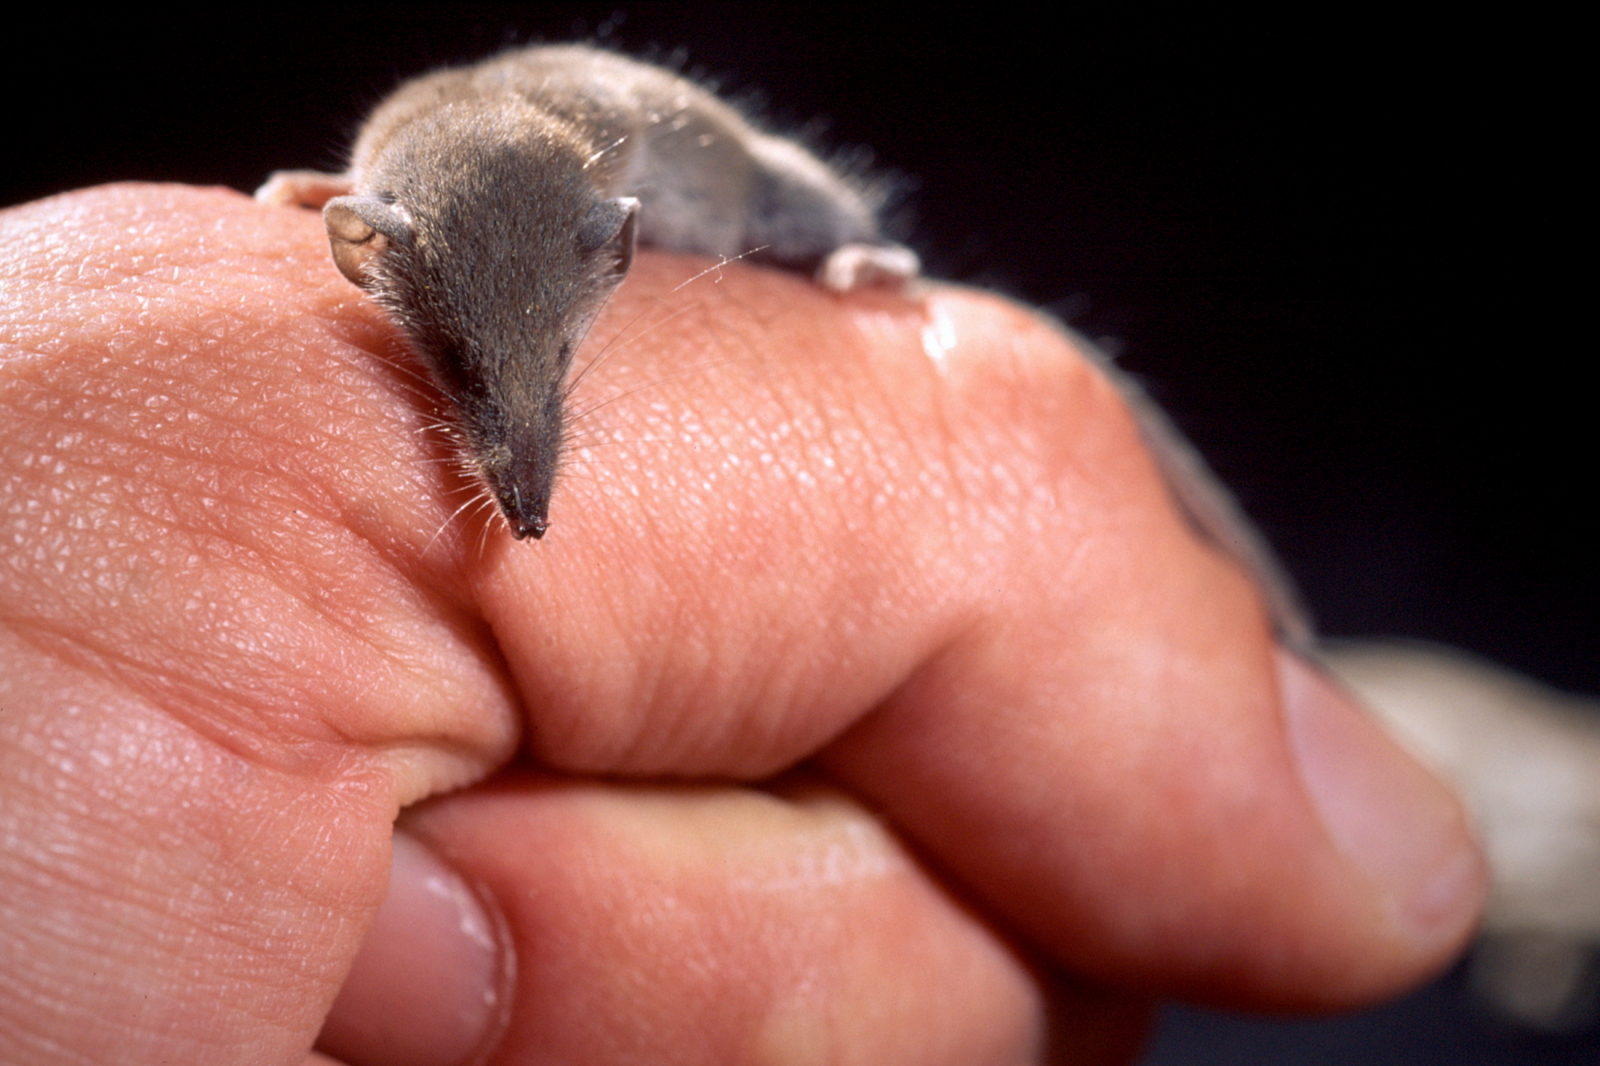 How do you find the smallest mammal in the world?